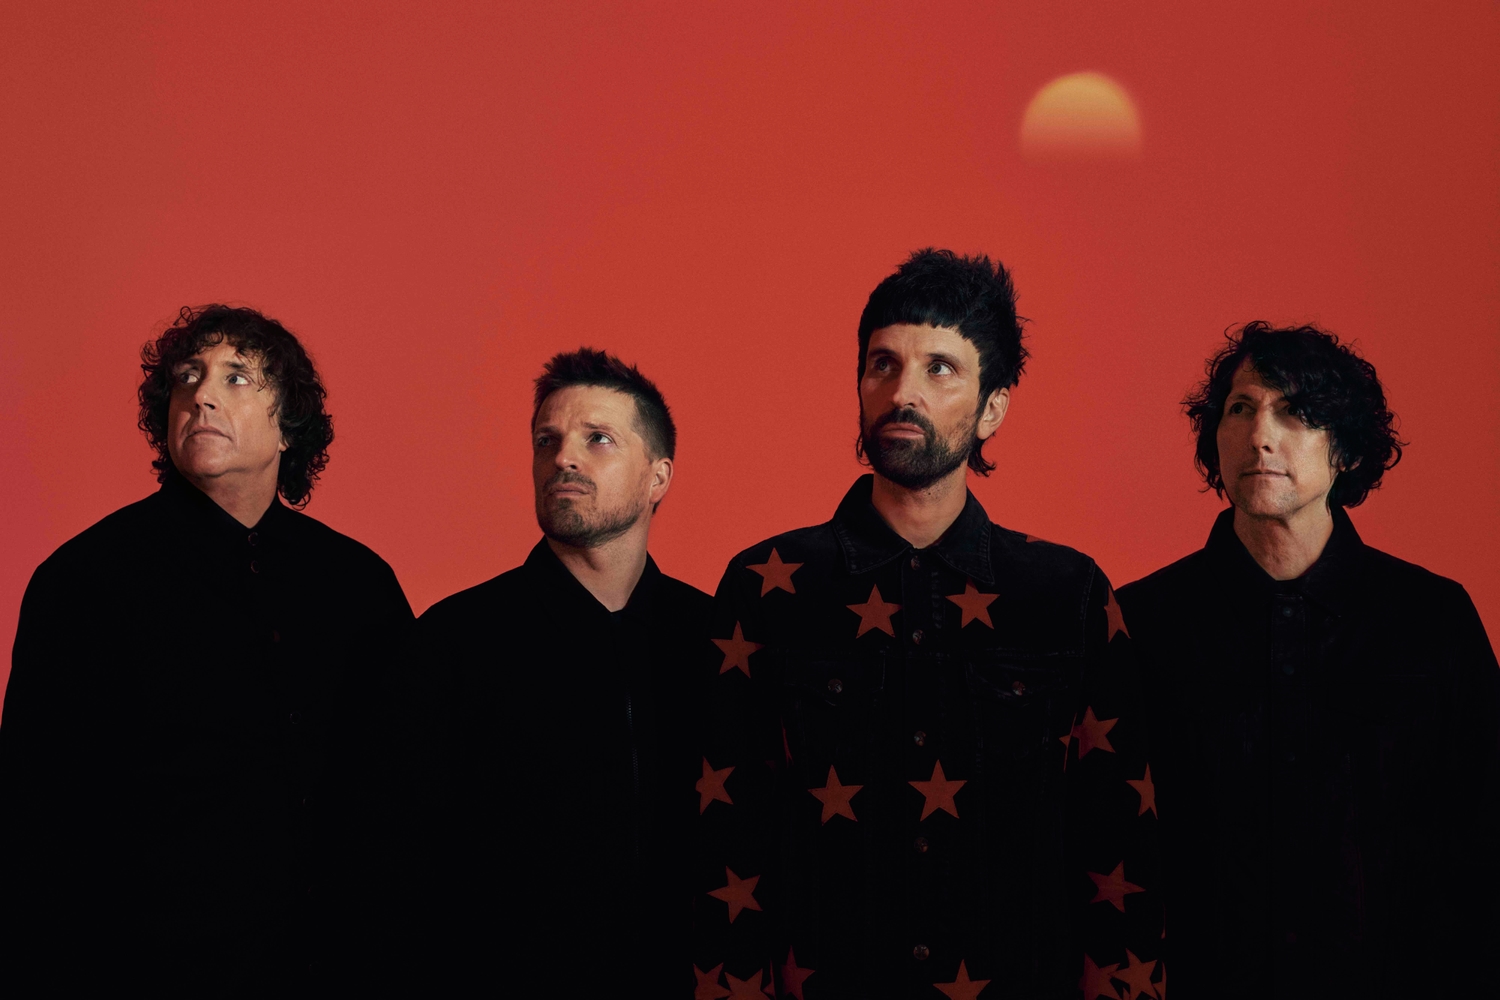 Kasabian announce new album ‘Happenings’ and share lead single ‘Call’